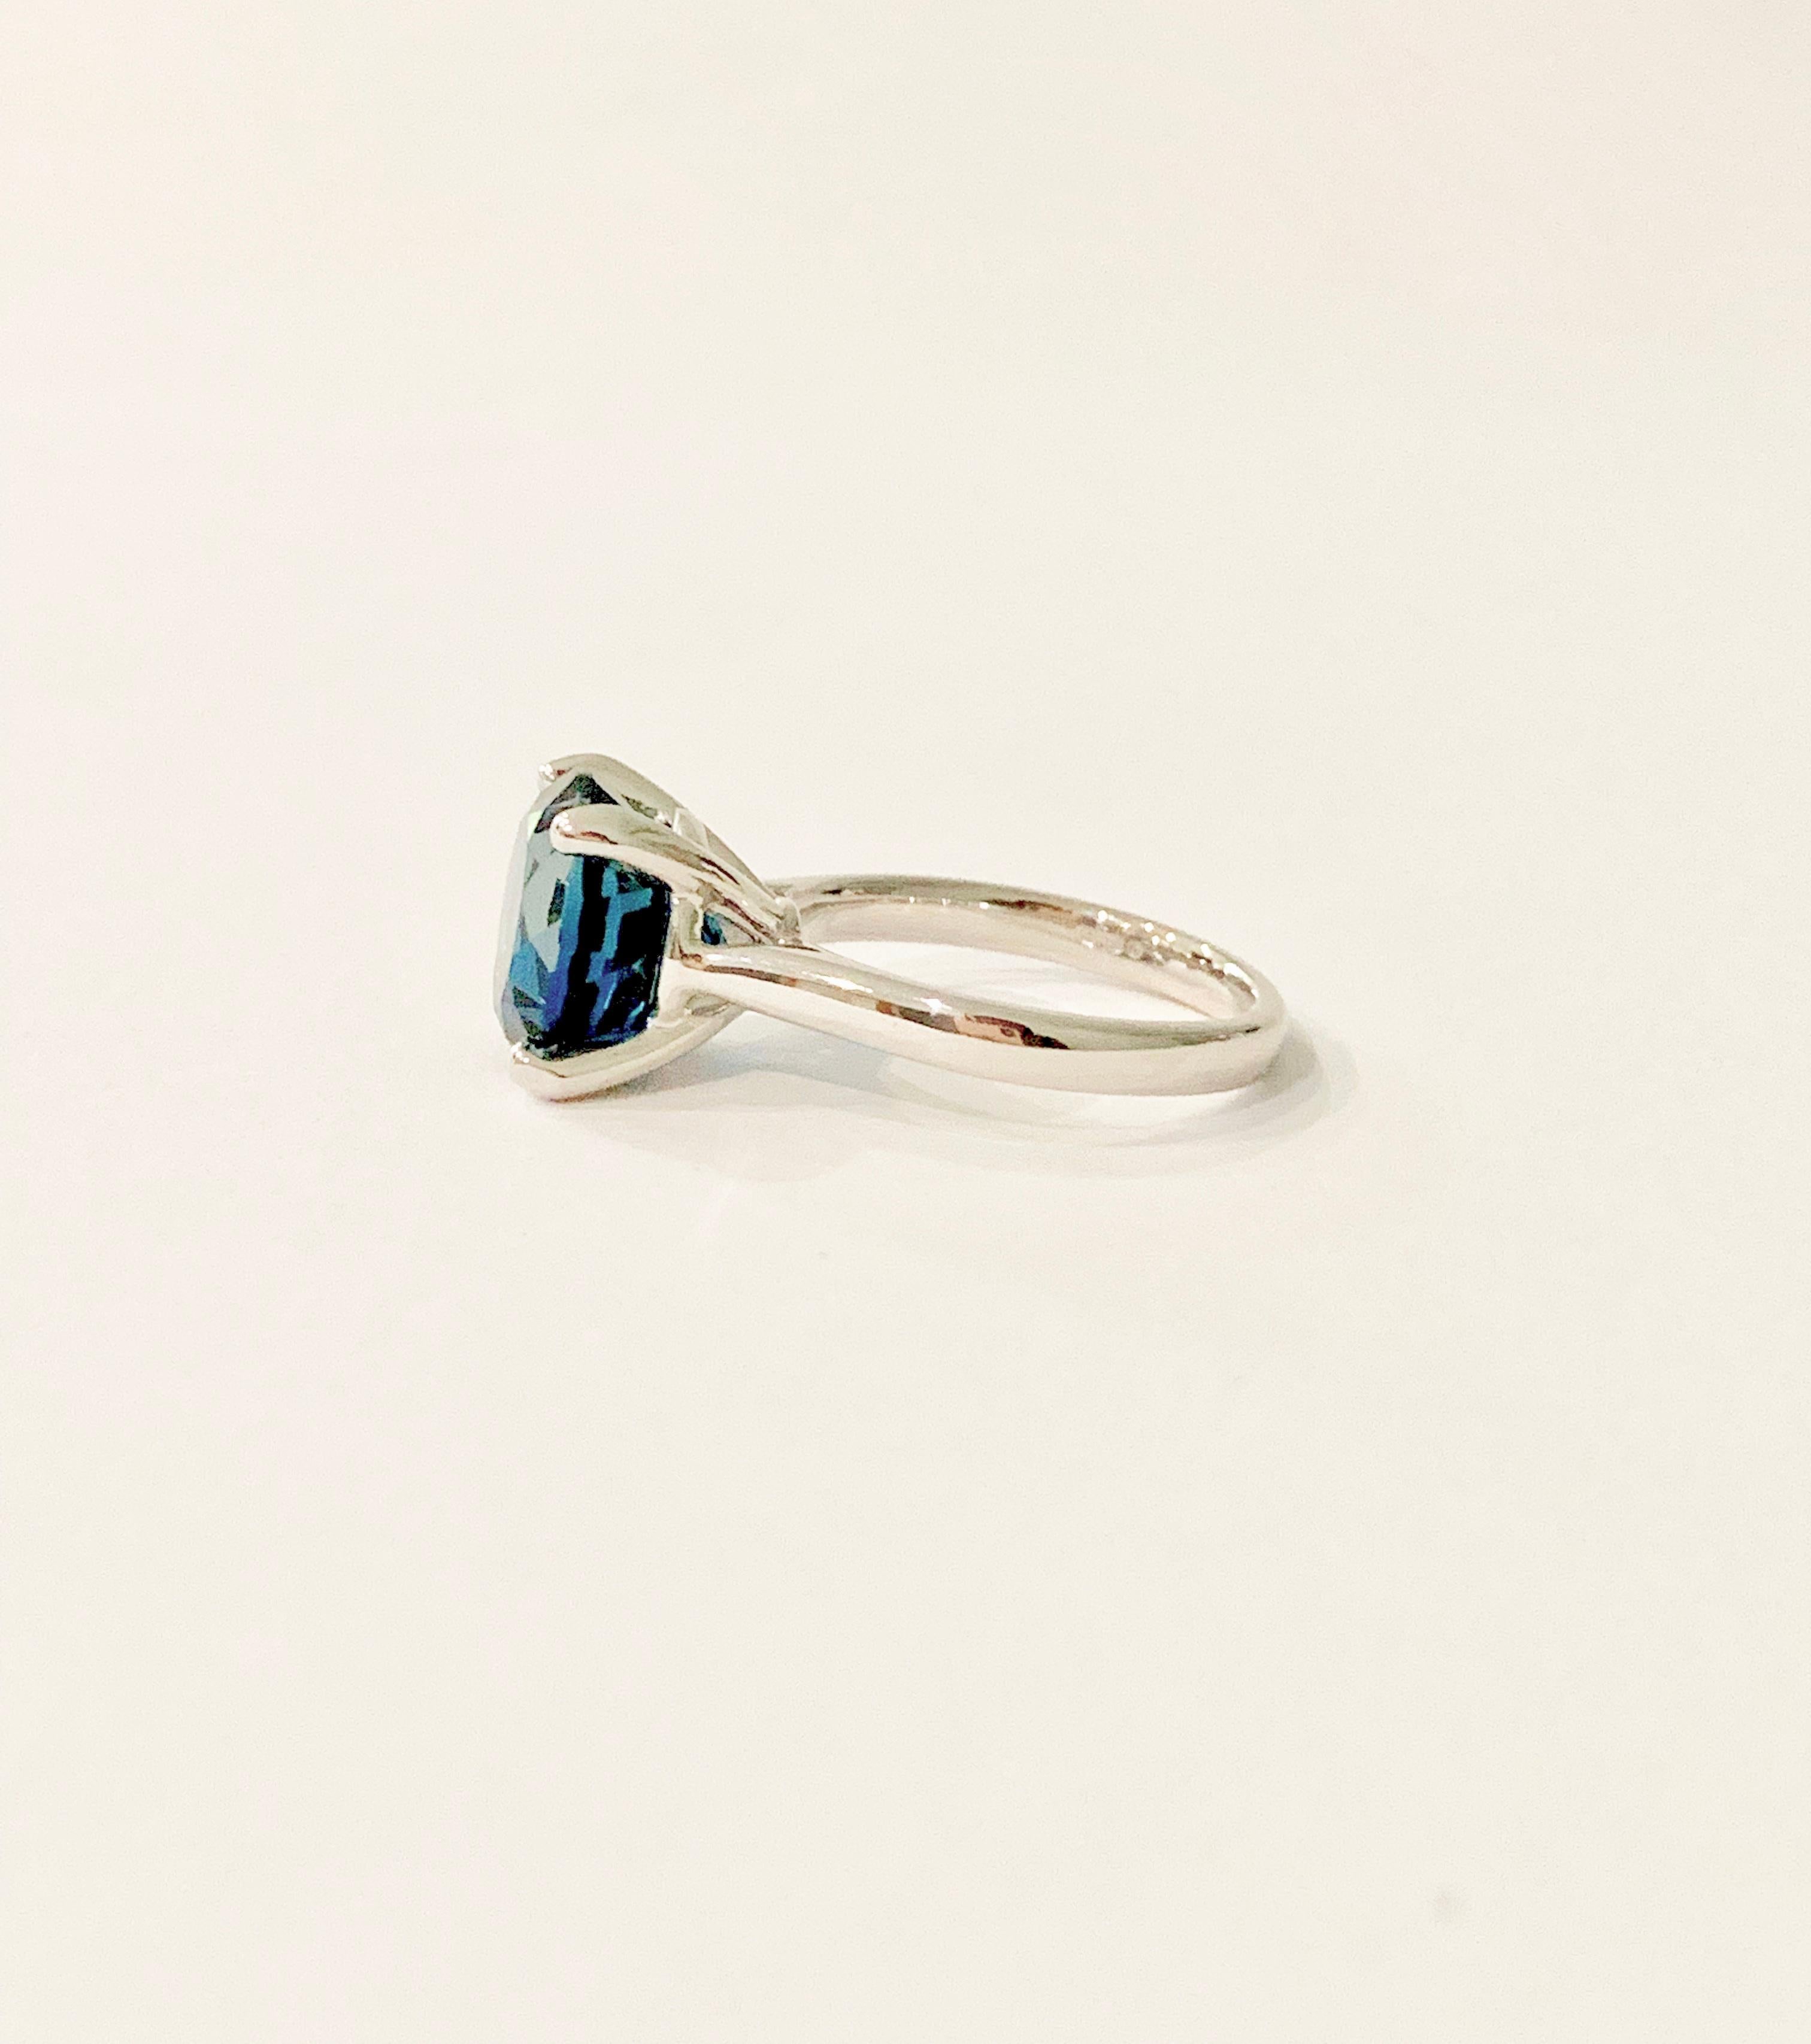 The premium round cut London Blue Topaz* has been set in a simple, but substantial,  four claw 18ct White Gold setting.  Making this design very contemporary with gorgeous clean lines.

The 6.90 ct London Blue Topaz has a wonderful rich velvety blue